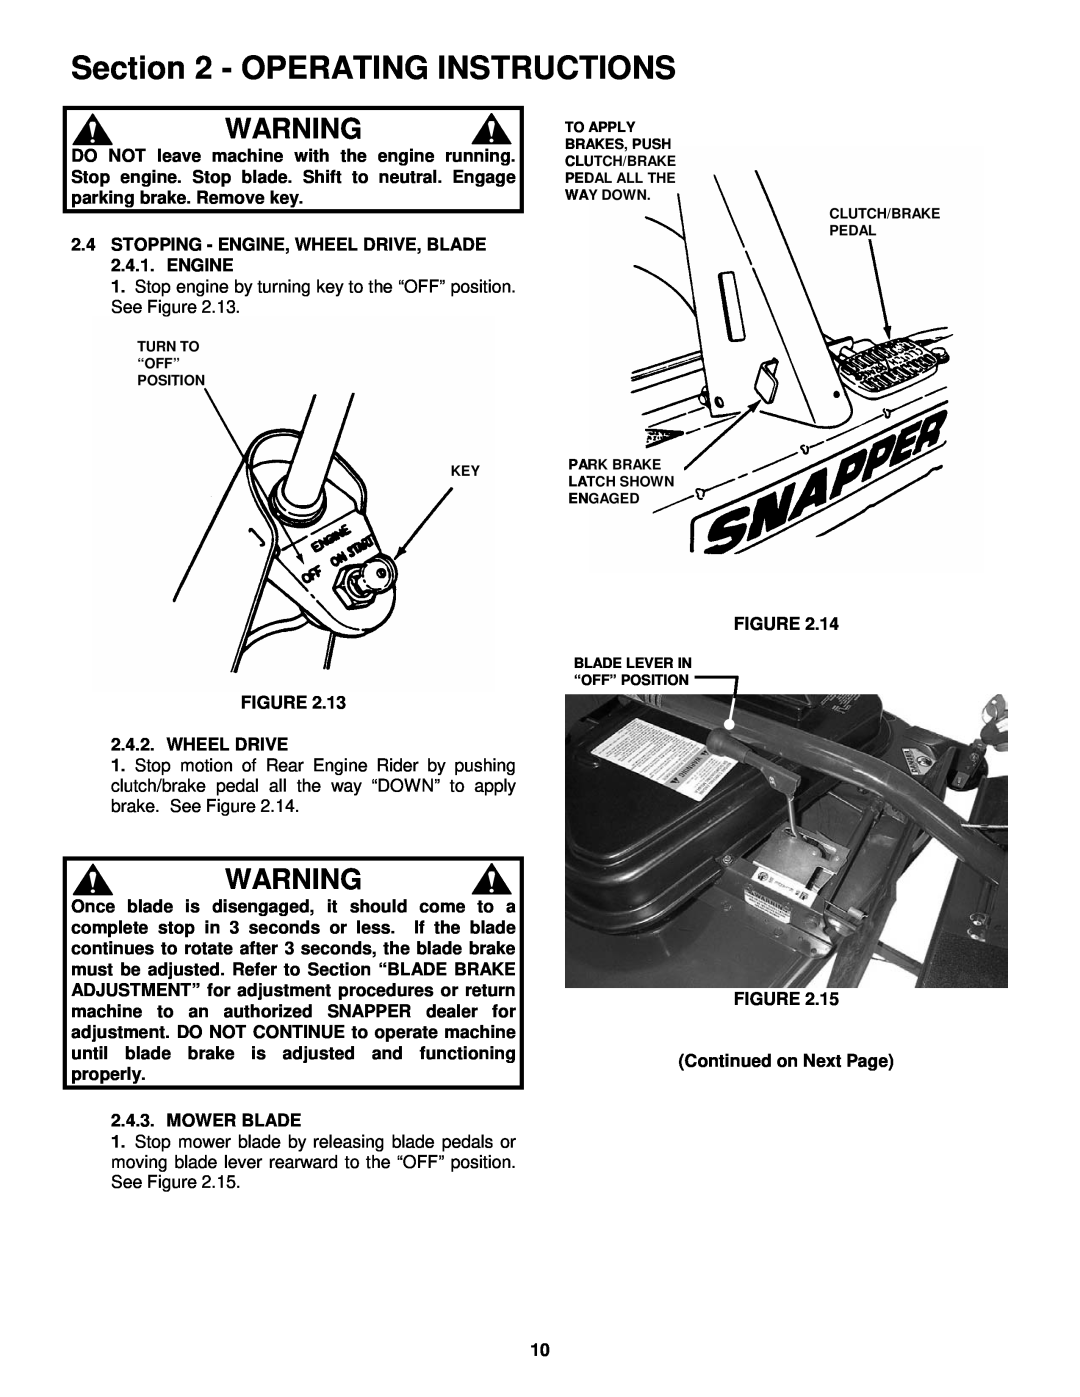 Snapper 421823BVE, W421623BVE Operating Instructions, Stop engine by turning key to the “OFF” position. See Figure 